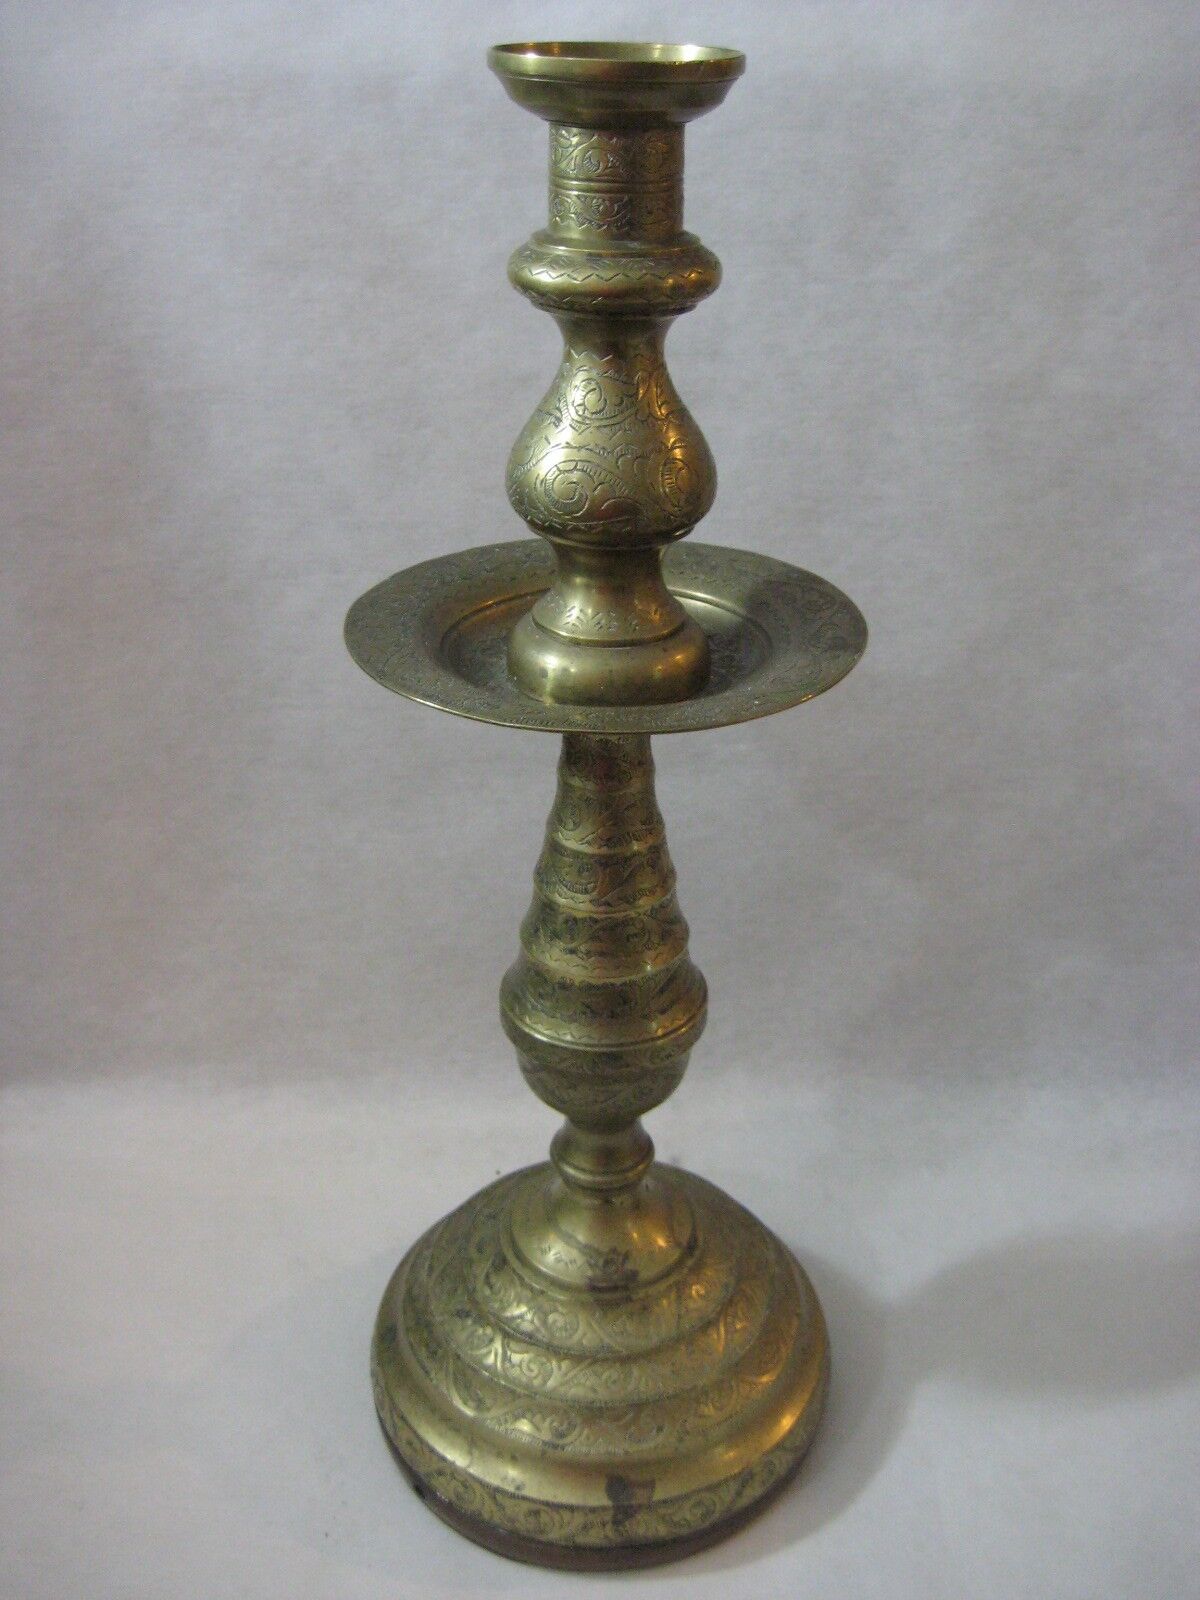 RARE LARGE VINTAGE CHINESE/INDIA HAND CHASED IN BRASS CANDLESTICK HOLDER